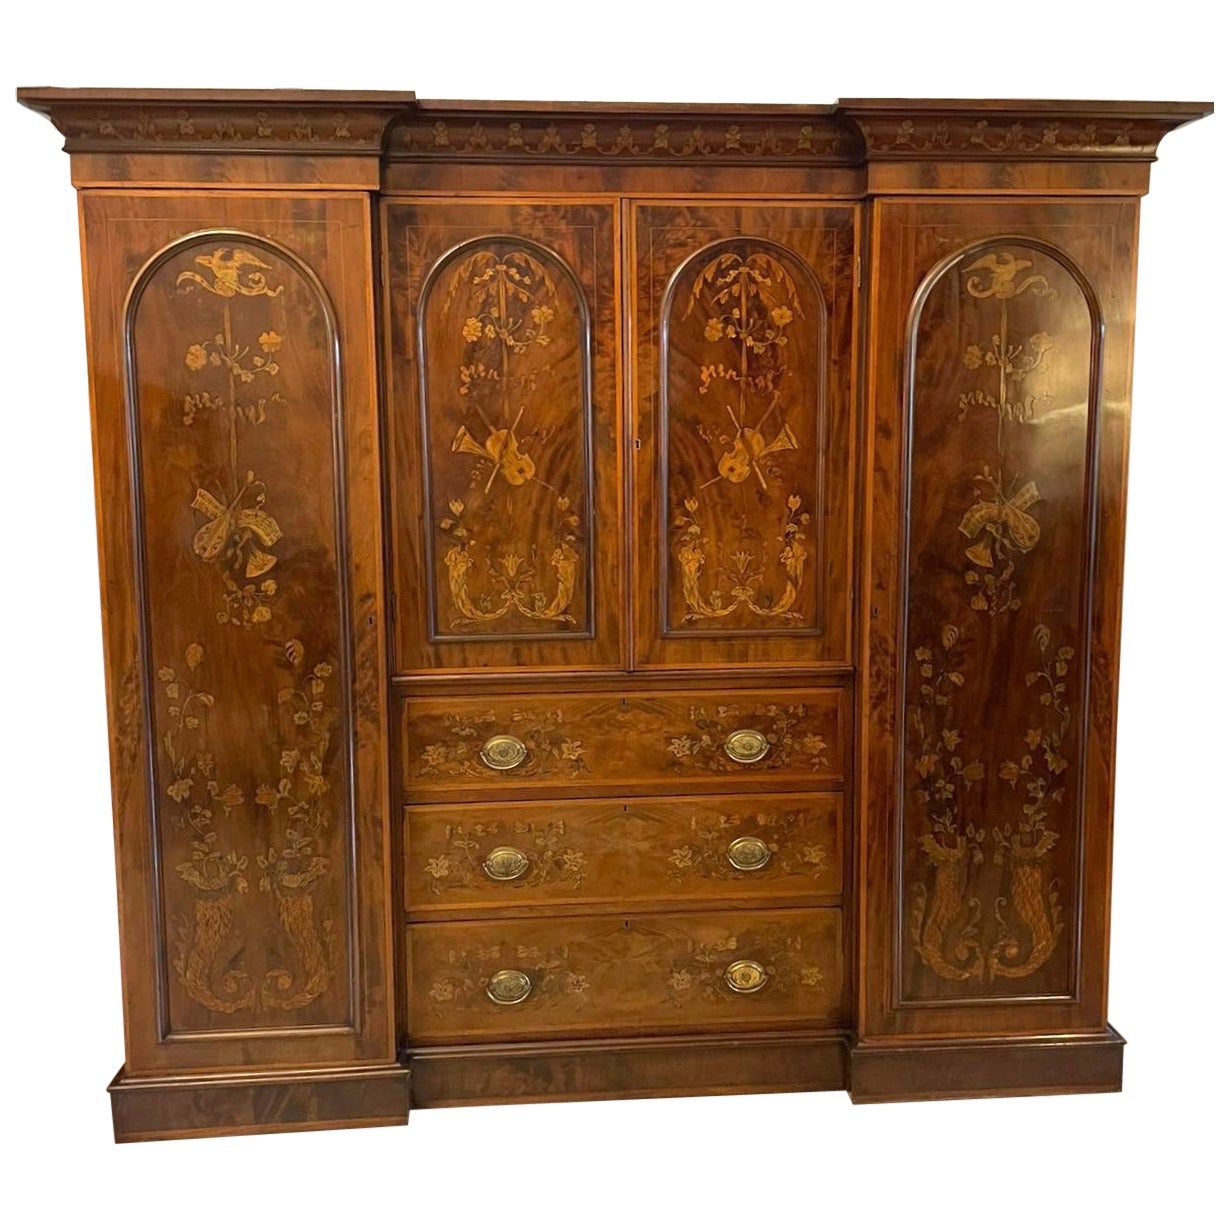 Outstanding Quality Large Antique Victorian Inlaid Mahogany Wardrobe 